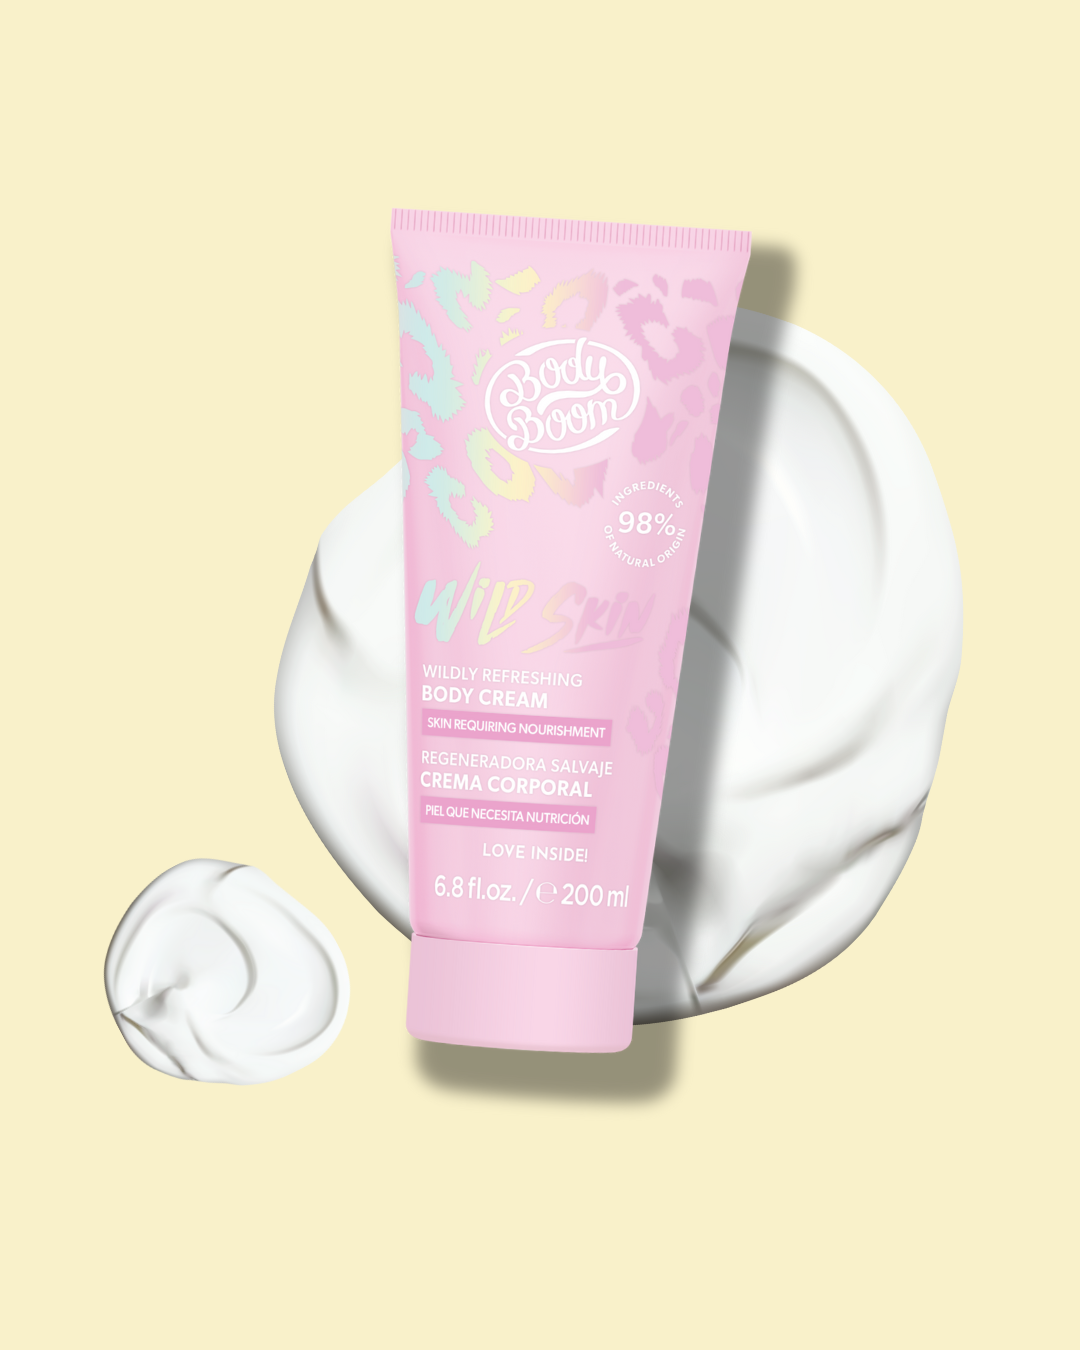 Wildly Refreshing Body Cream for Dry and Dehydrated Skin